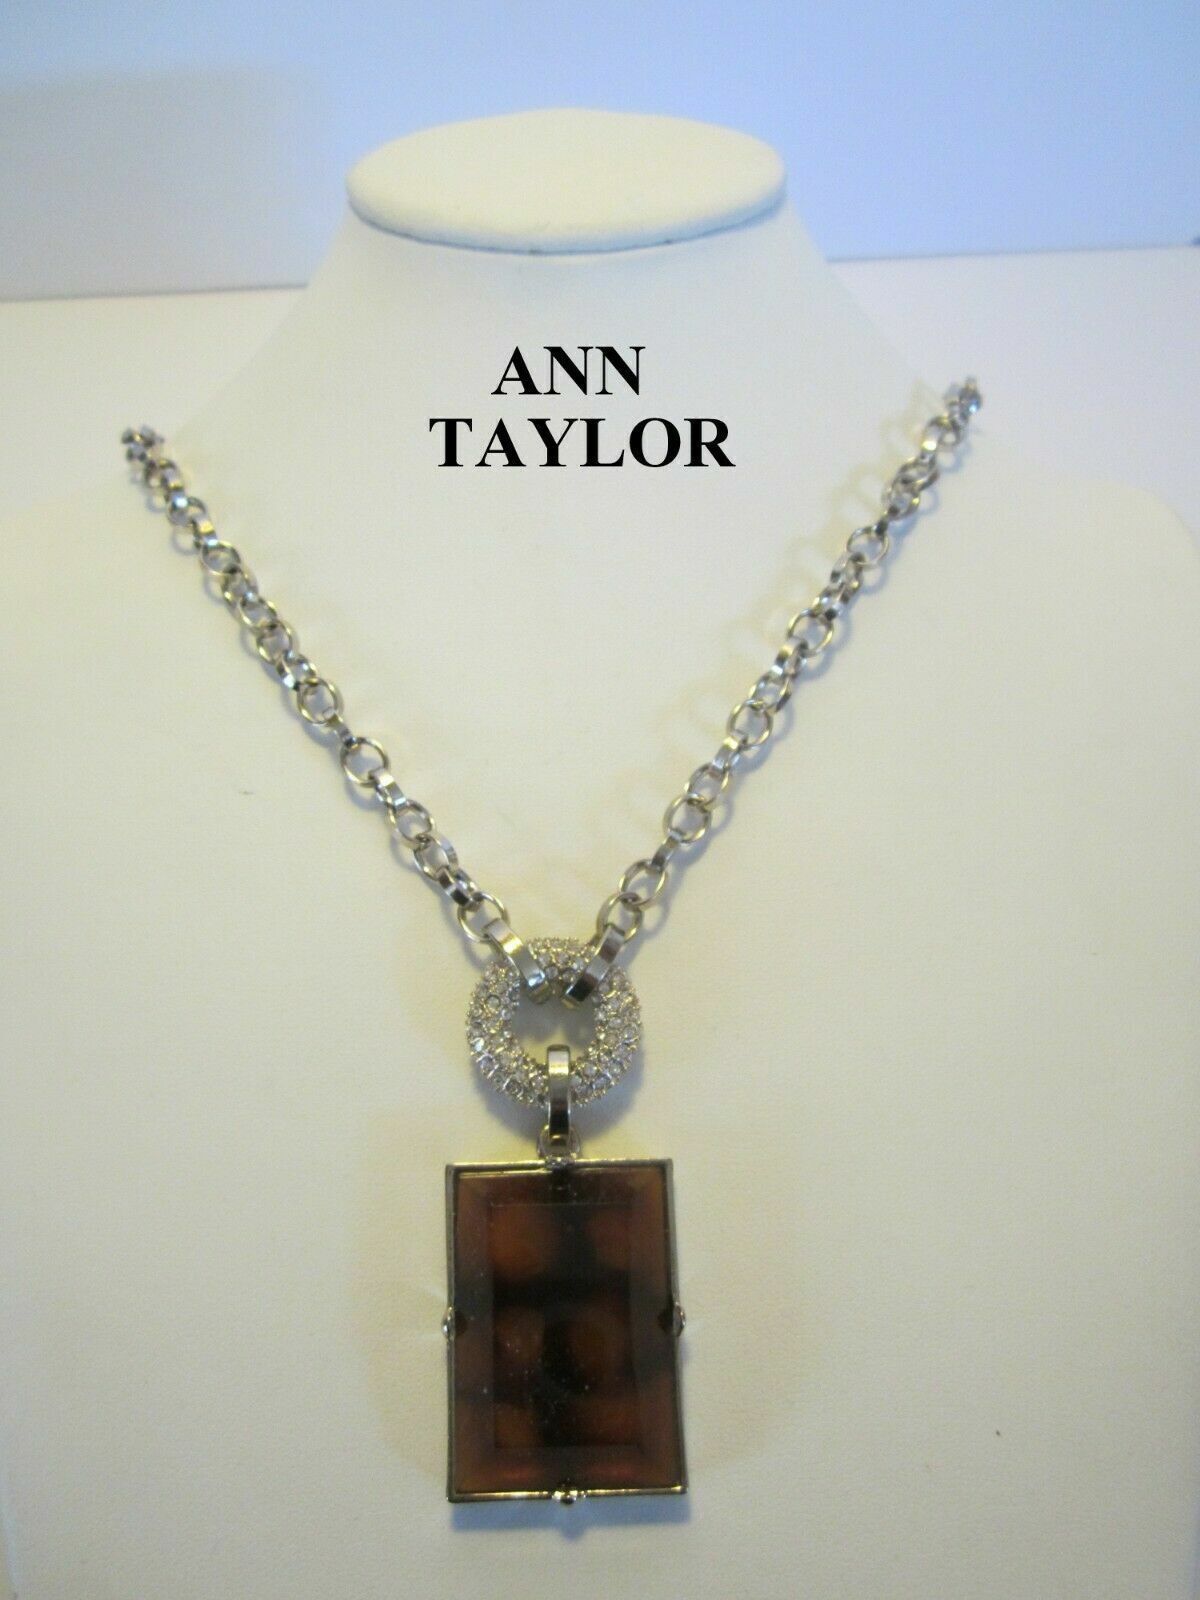 Primary image for Ann Taylor Pendant Necklace Faux Tiger Eye Crystal Rhinestone Silver Tone Chain